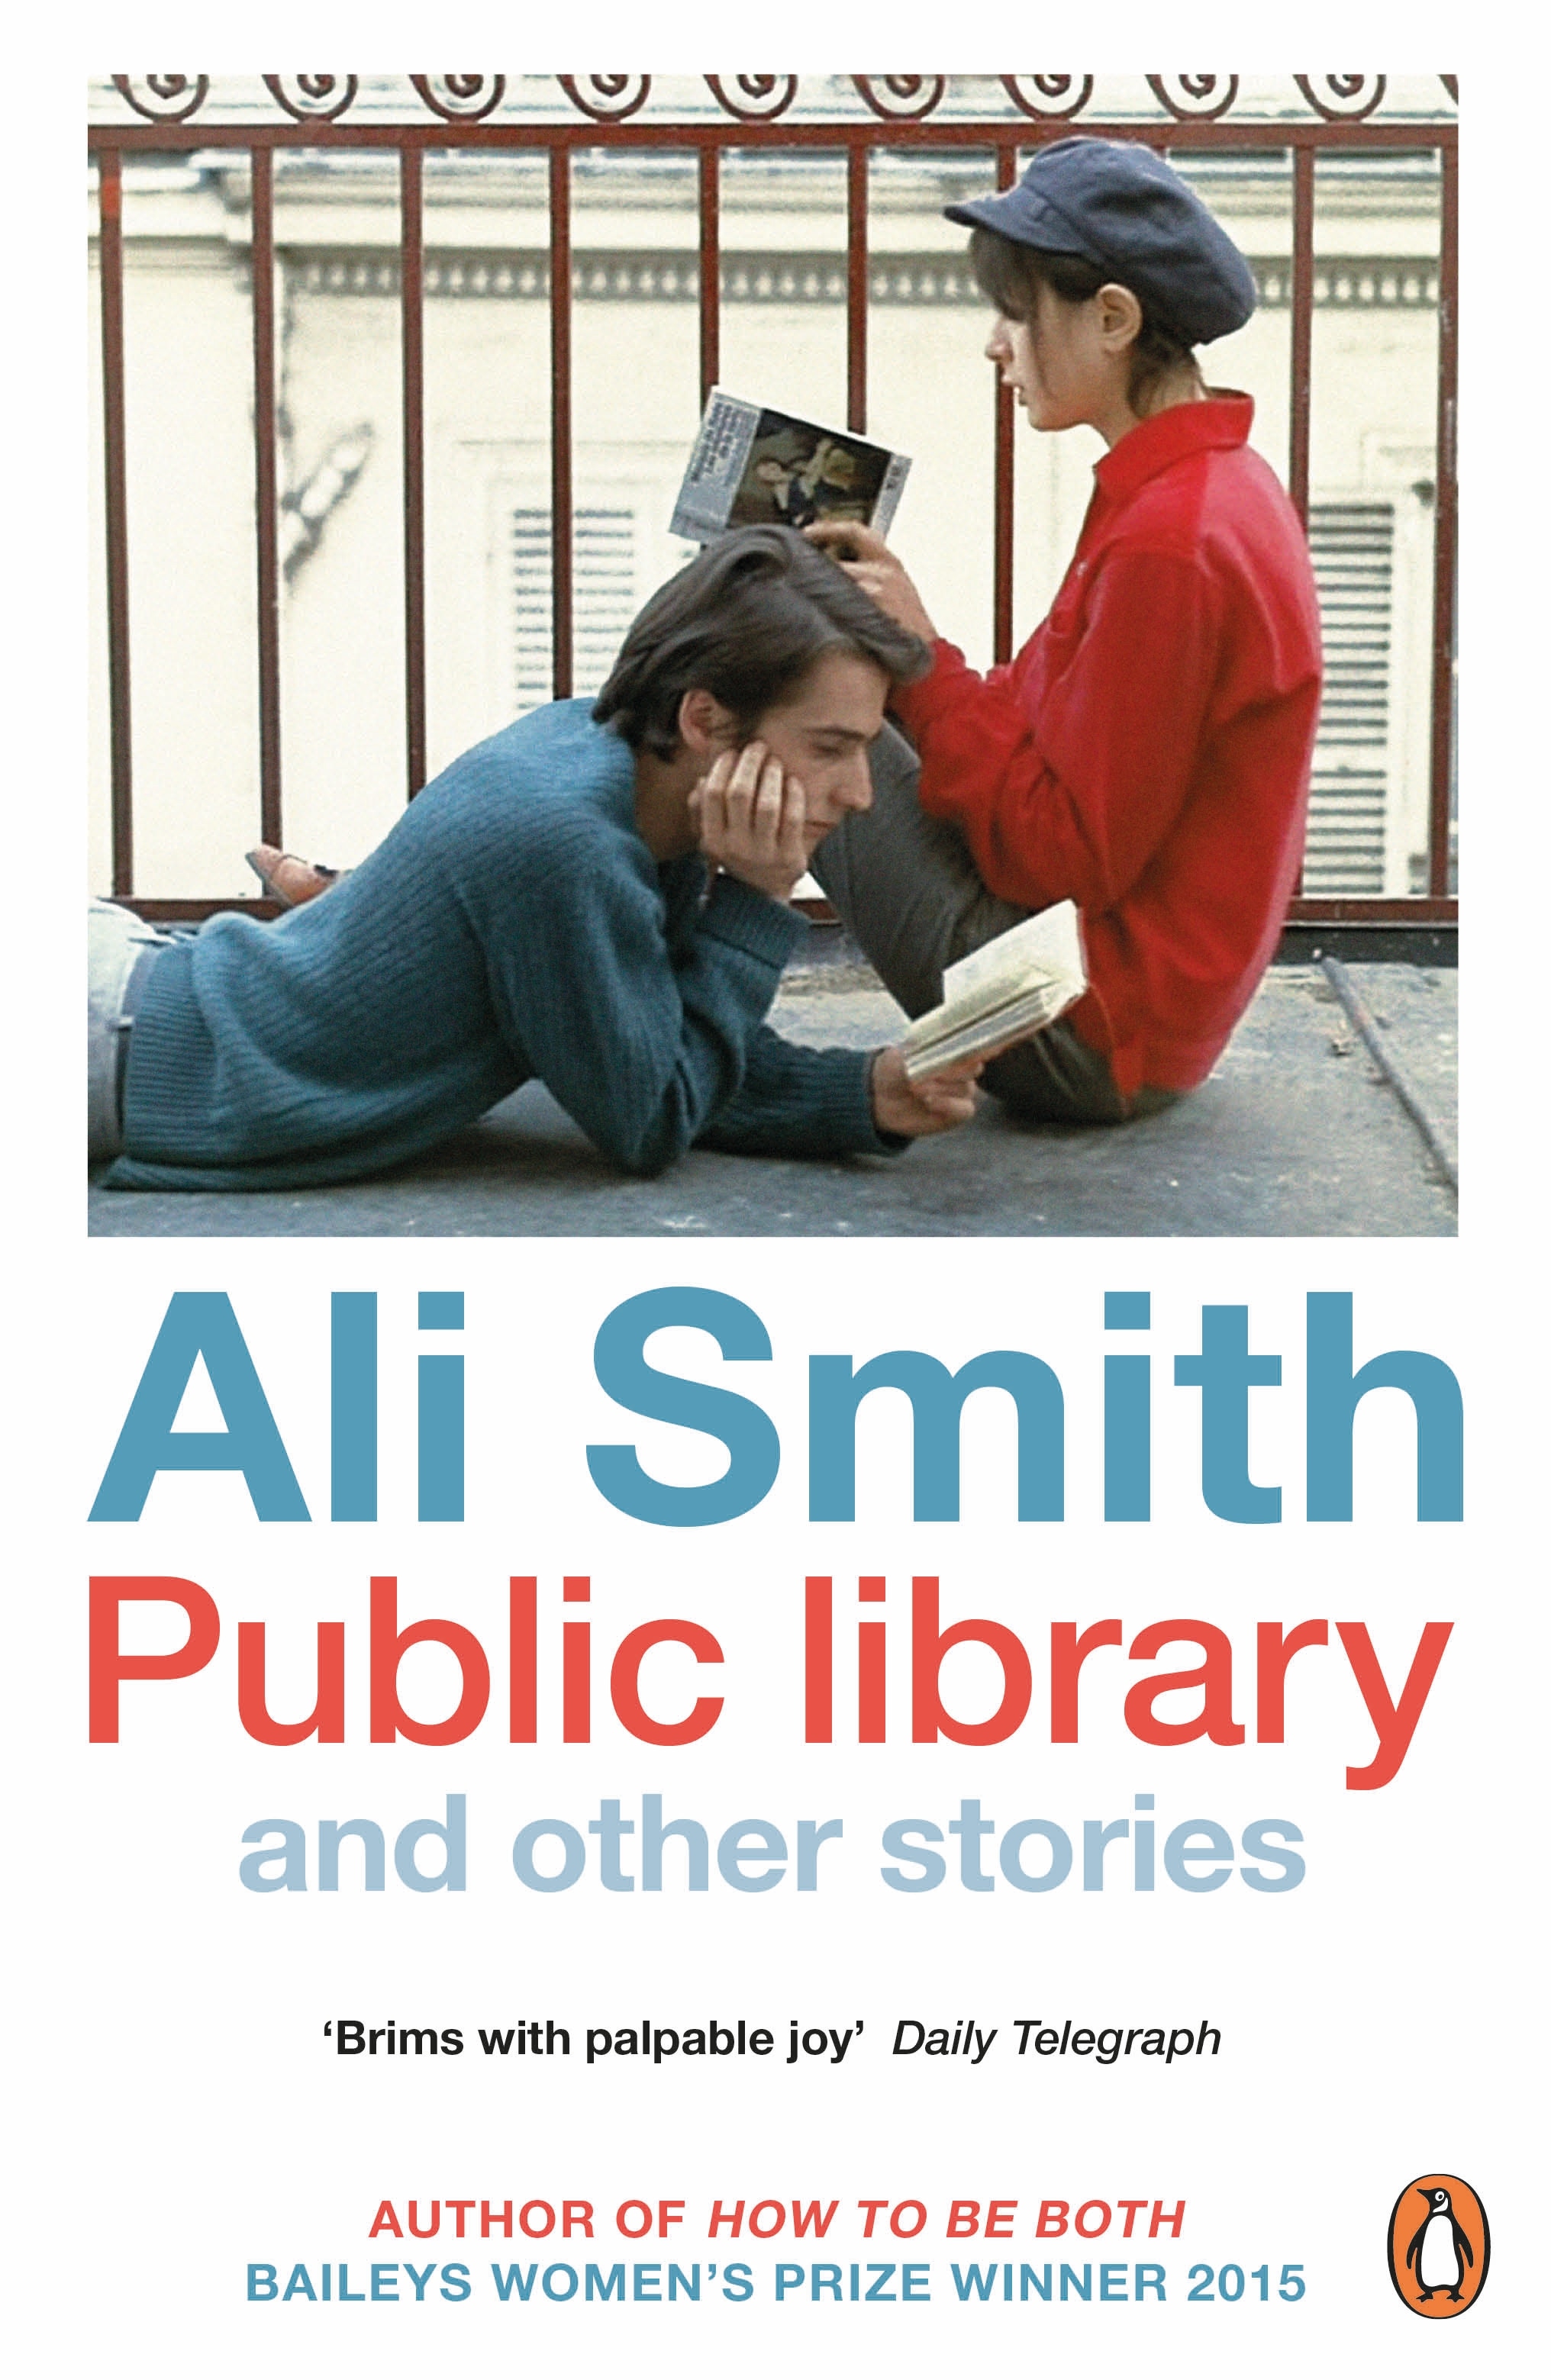 Book “Public library and other stories” by Ali Smith — May 5, 2016